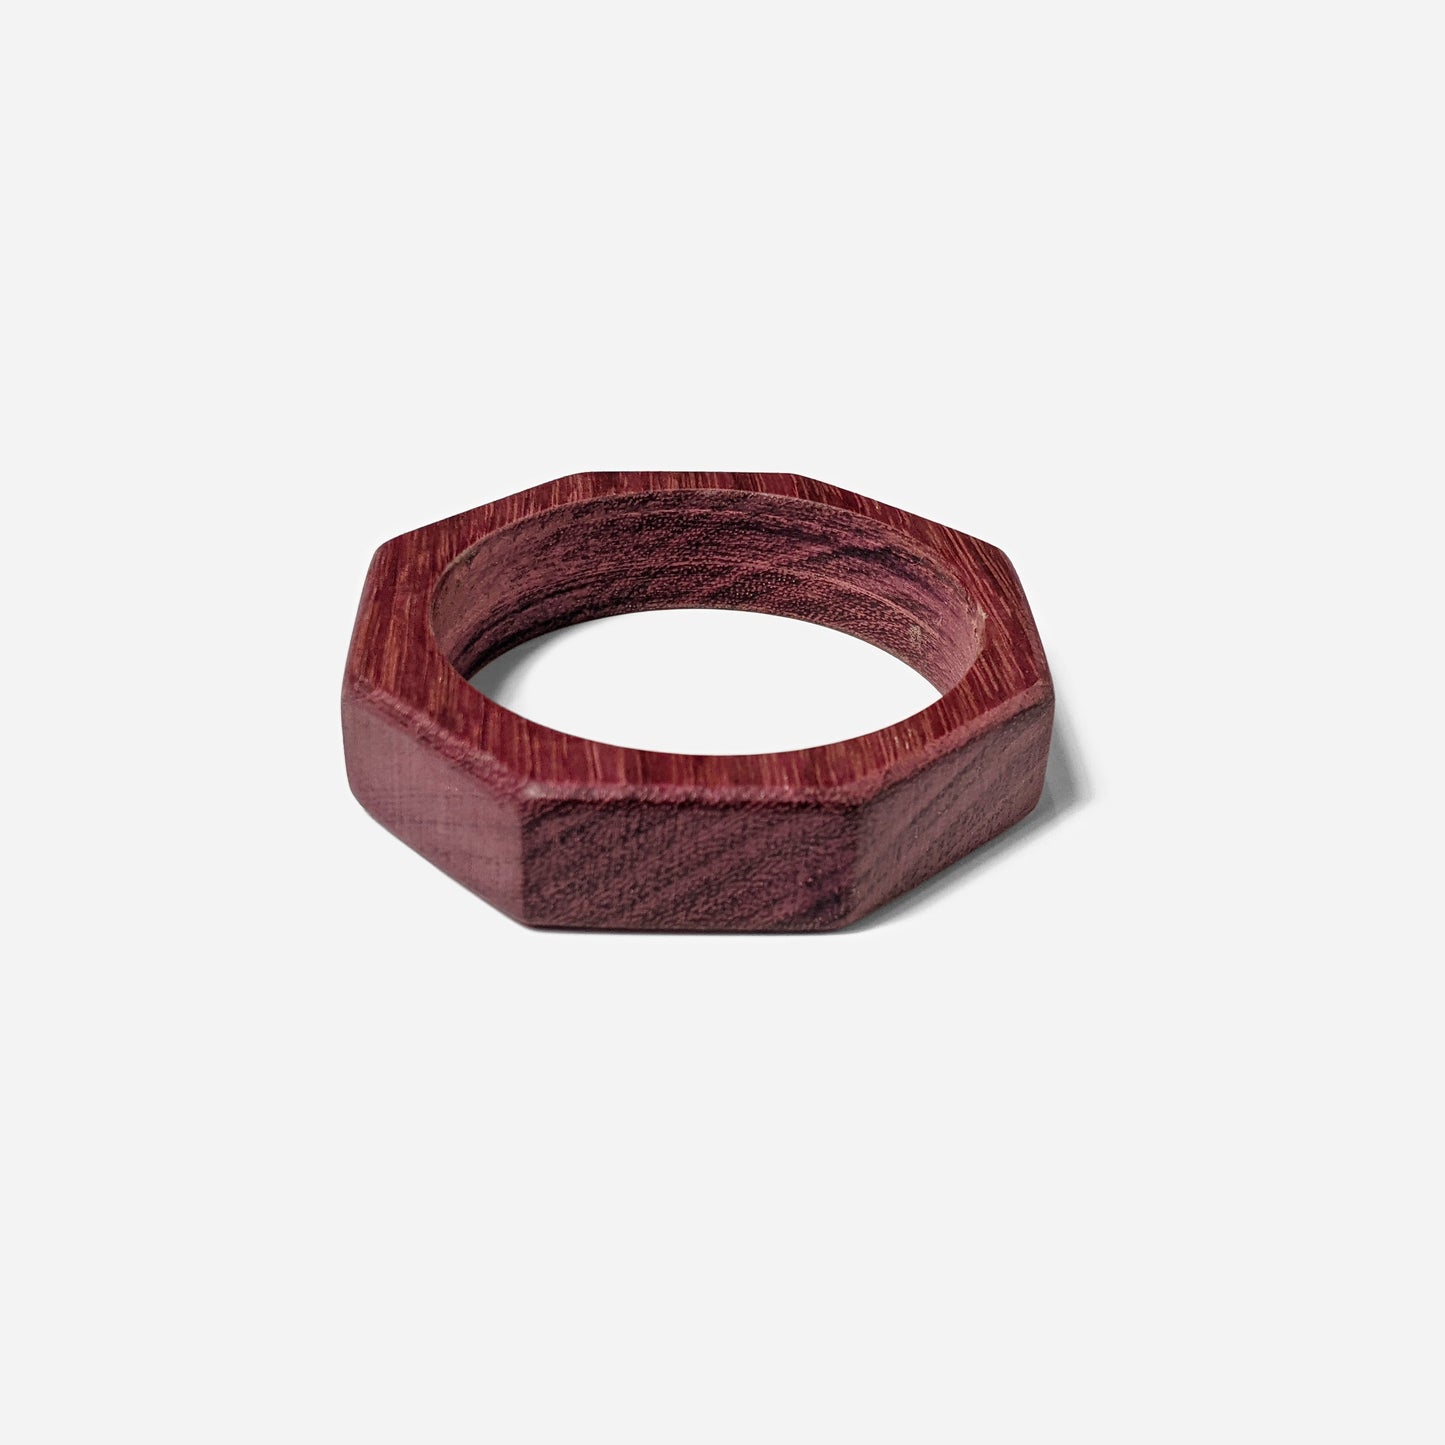 Woven Bracelet - Assorted – Made for Freedom